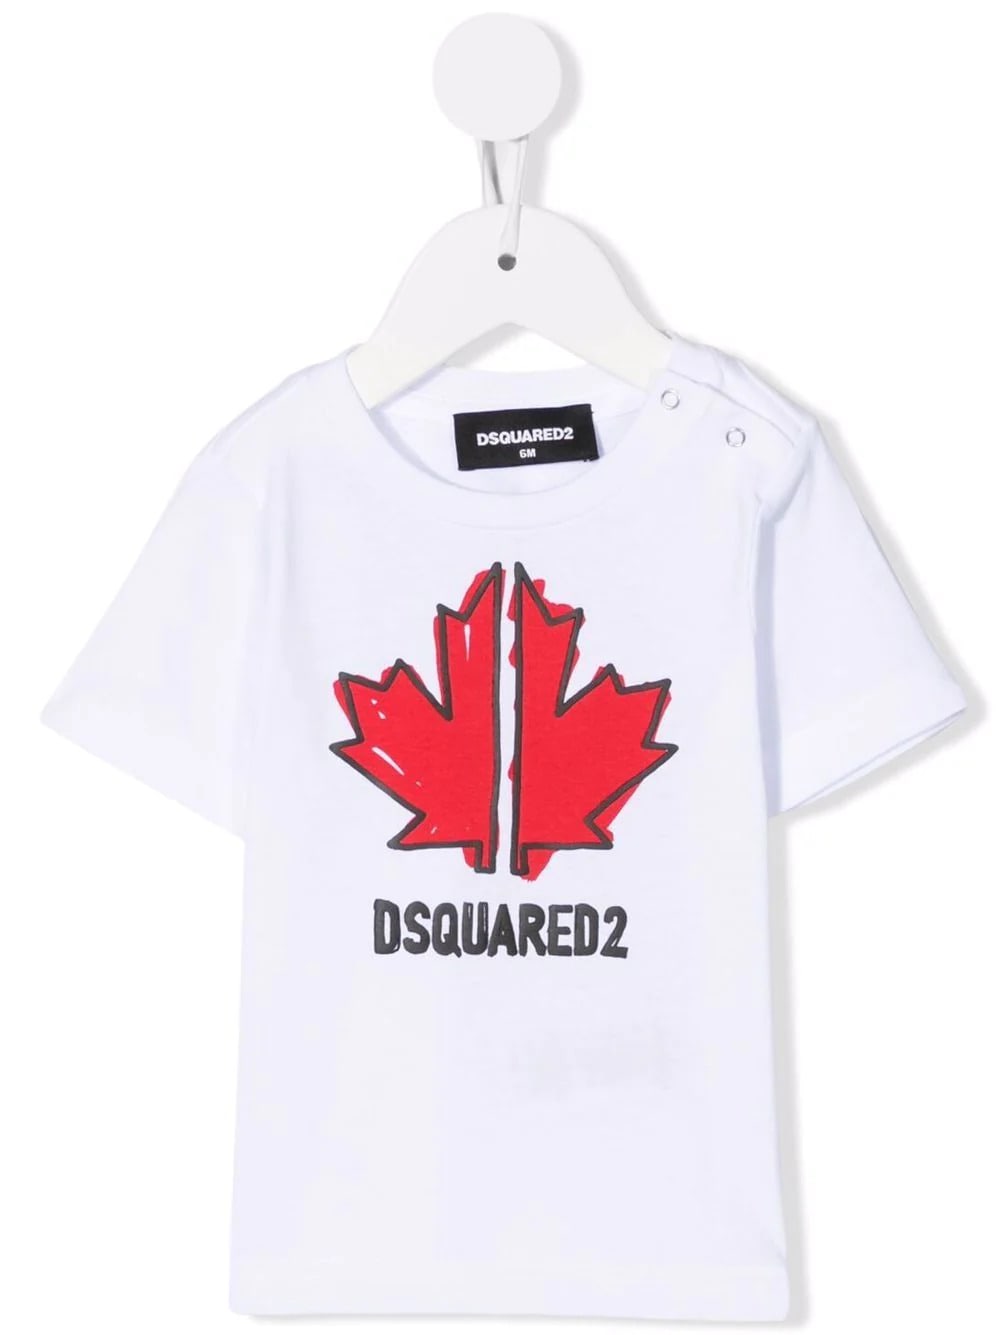 Dsquared2 Kids White T-shirt With Front And Back Sport Edtn.05 Print